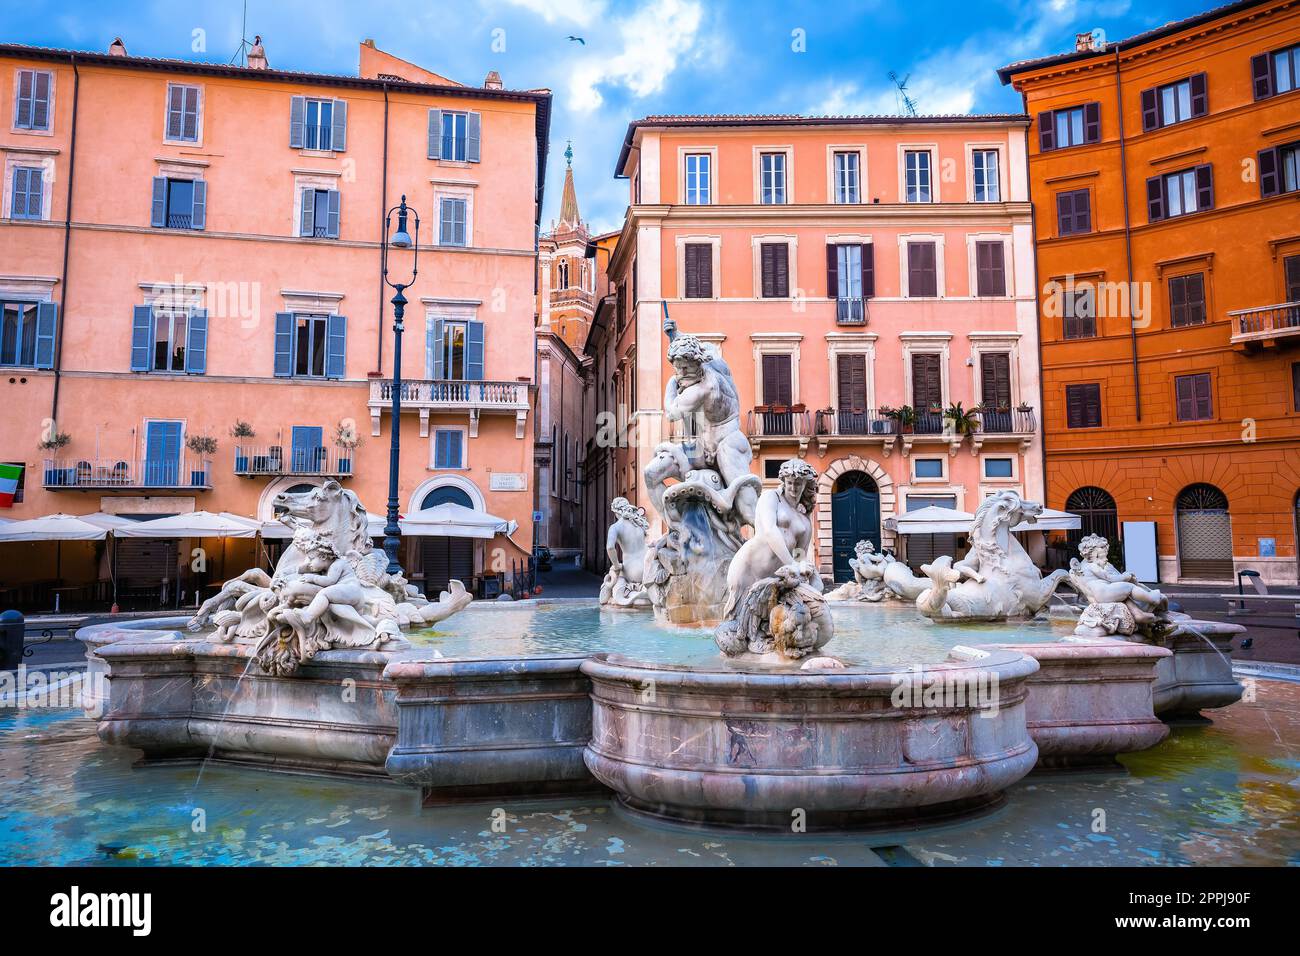 Piazza Navona square fountain and colorful architecture view Stock Photo